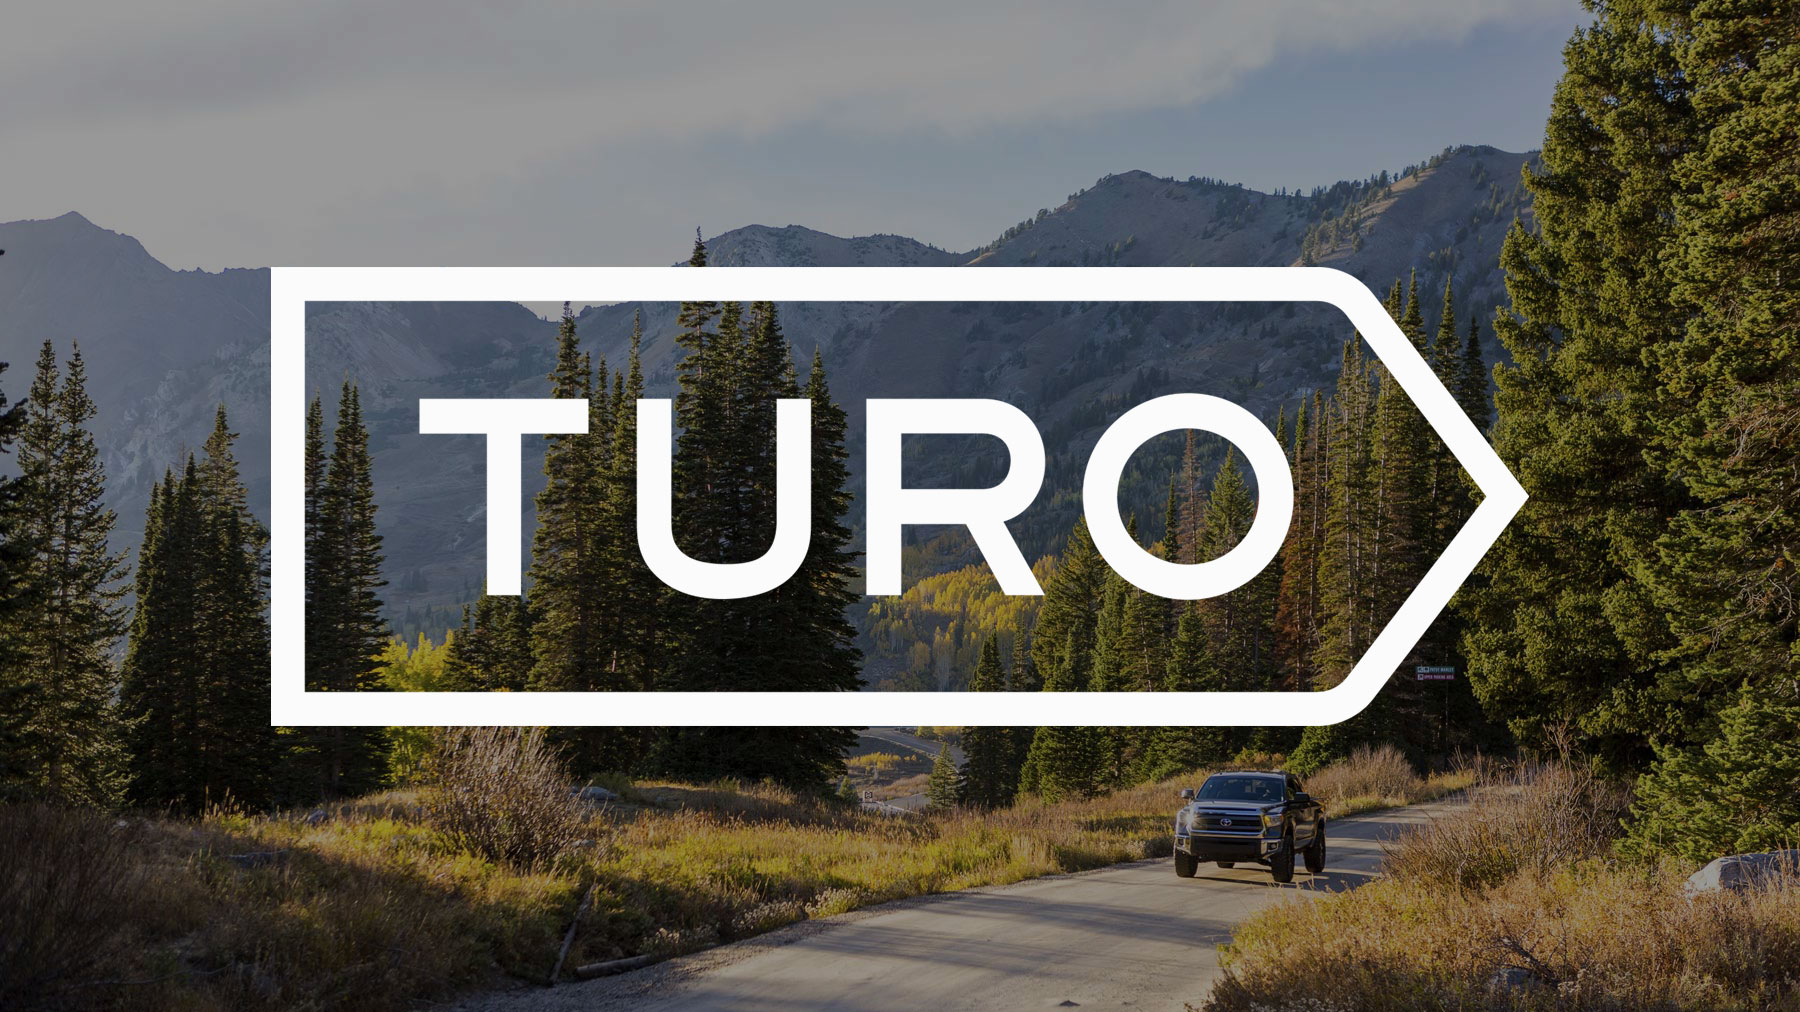 Turo is a platform for people who want to rent a car at a good price.